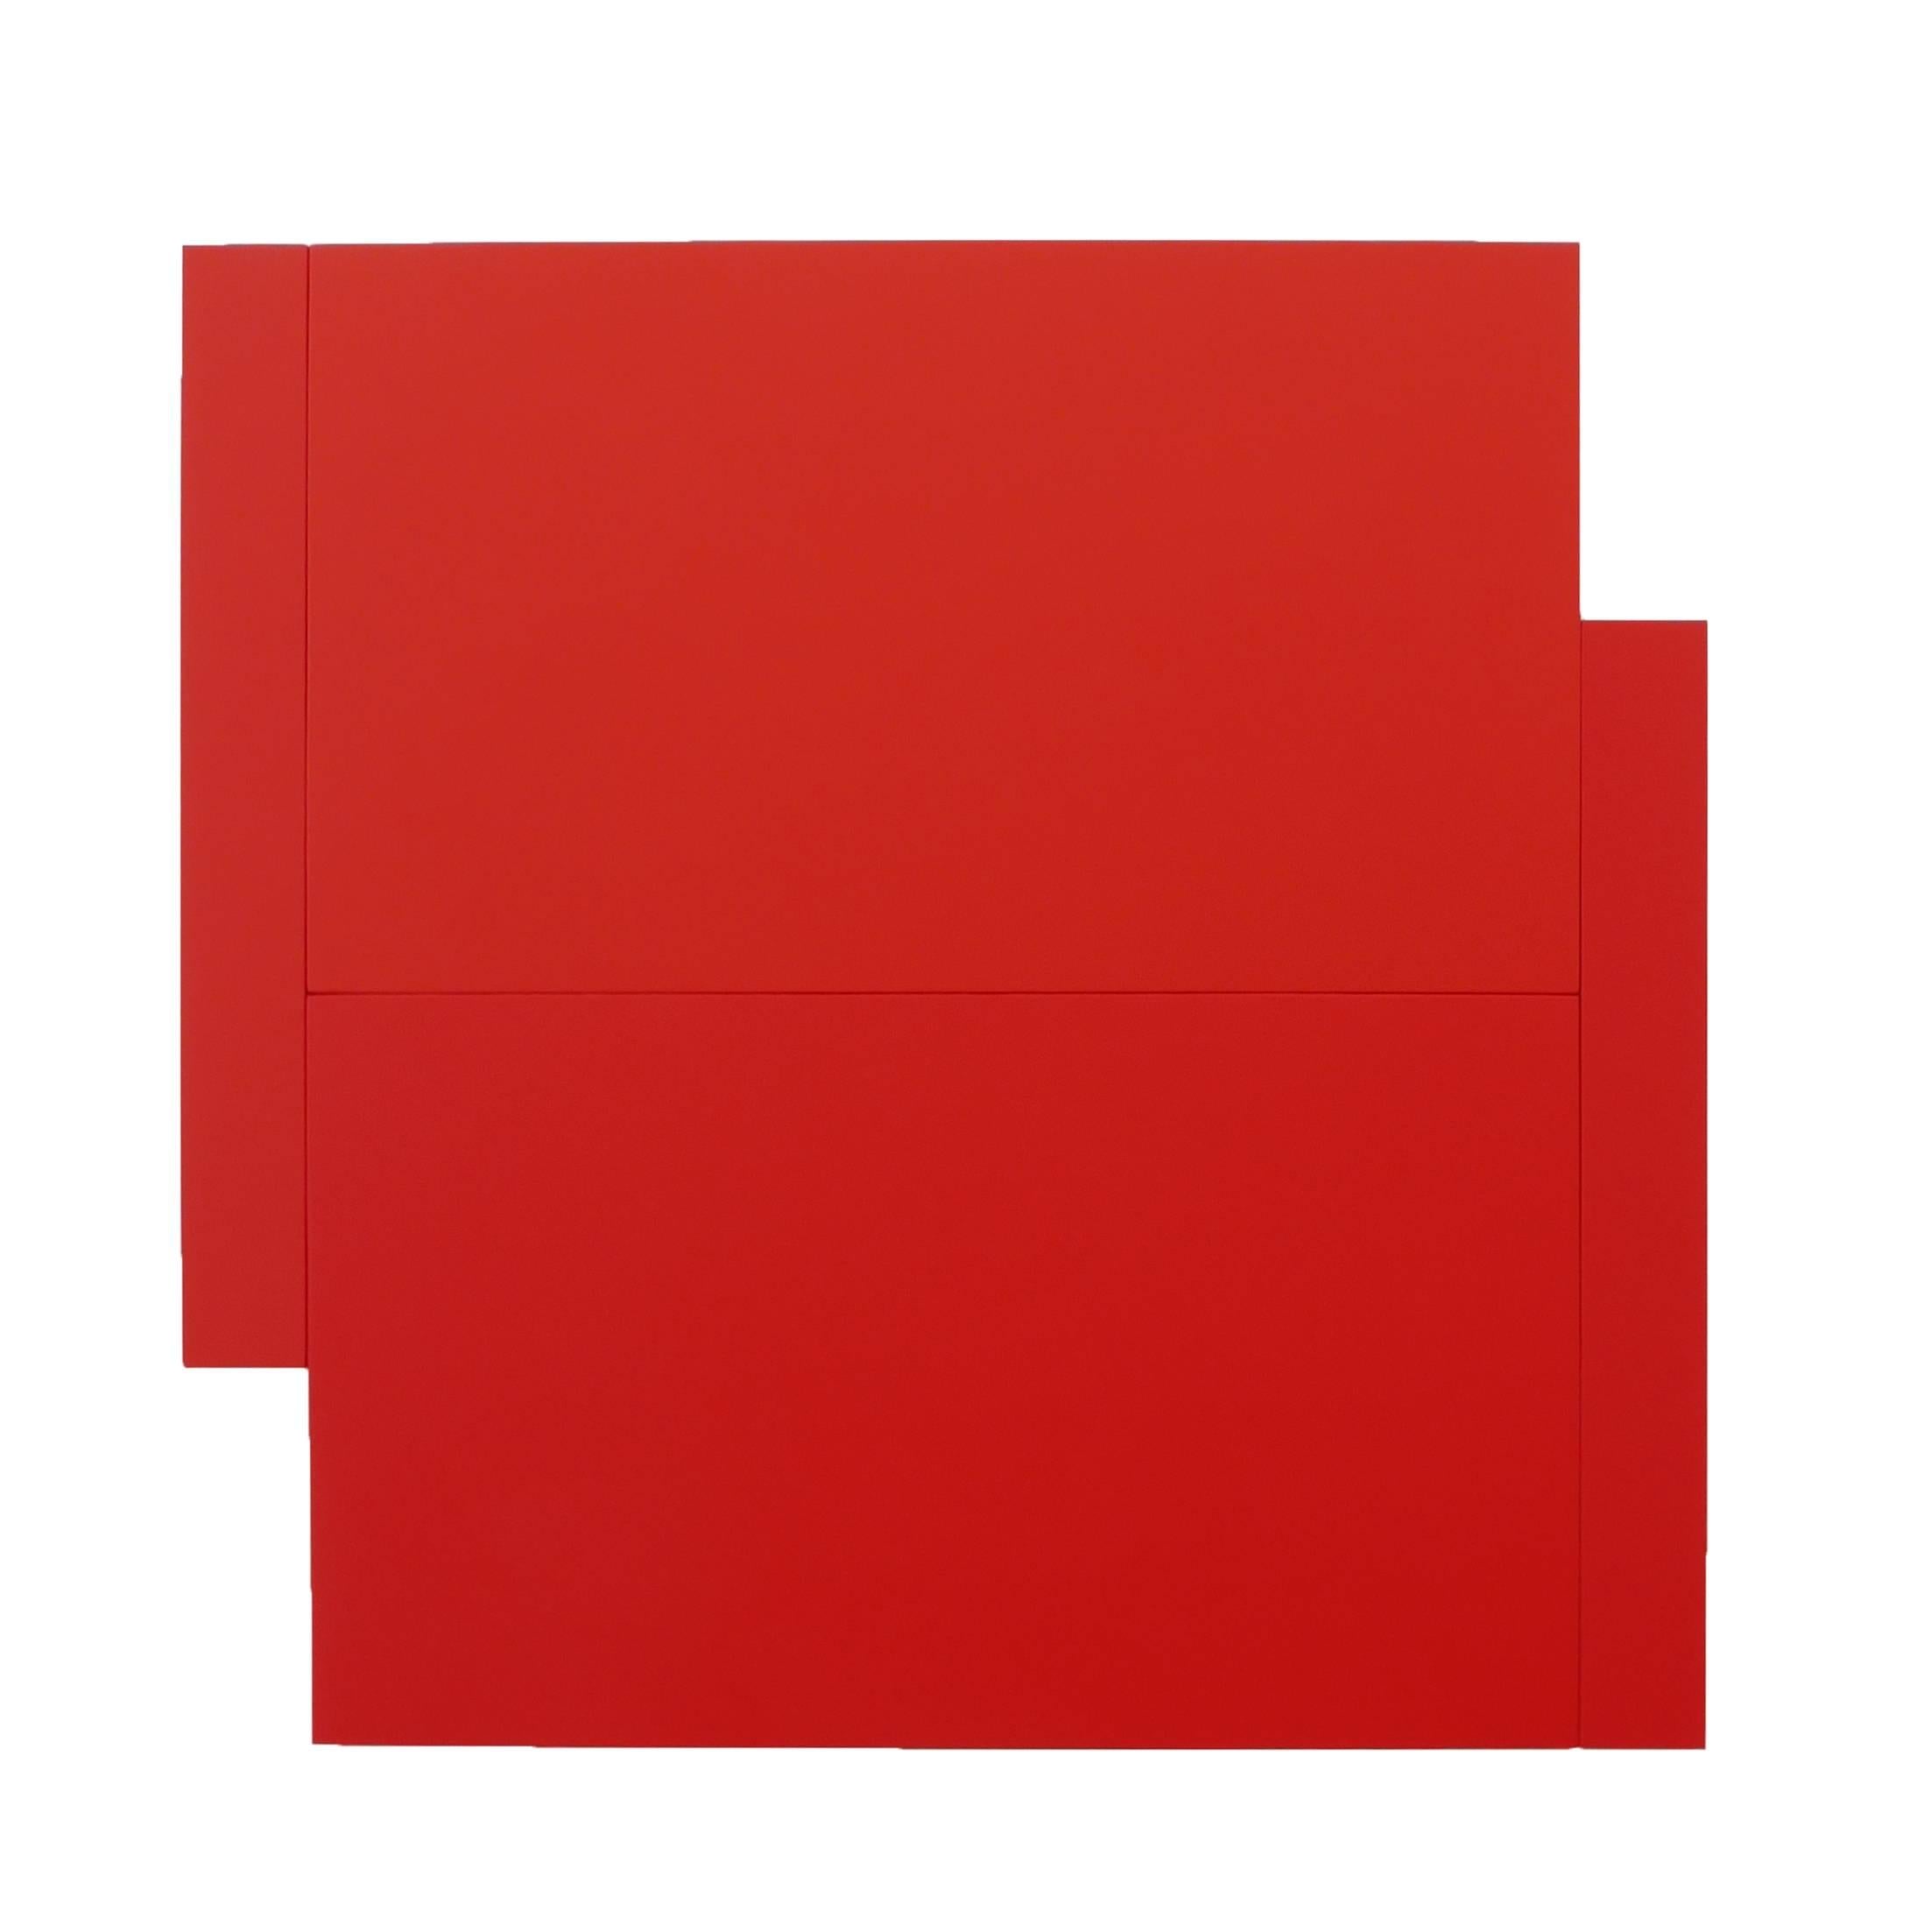 Scot Heywood Abstract Painting - Shift - Red on Red